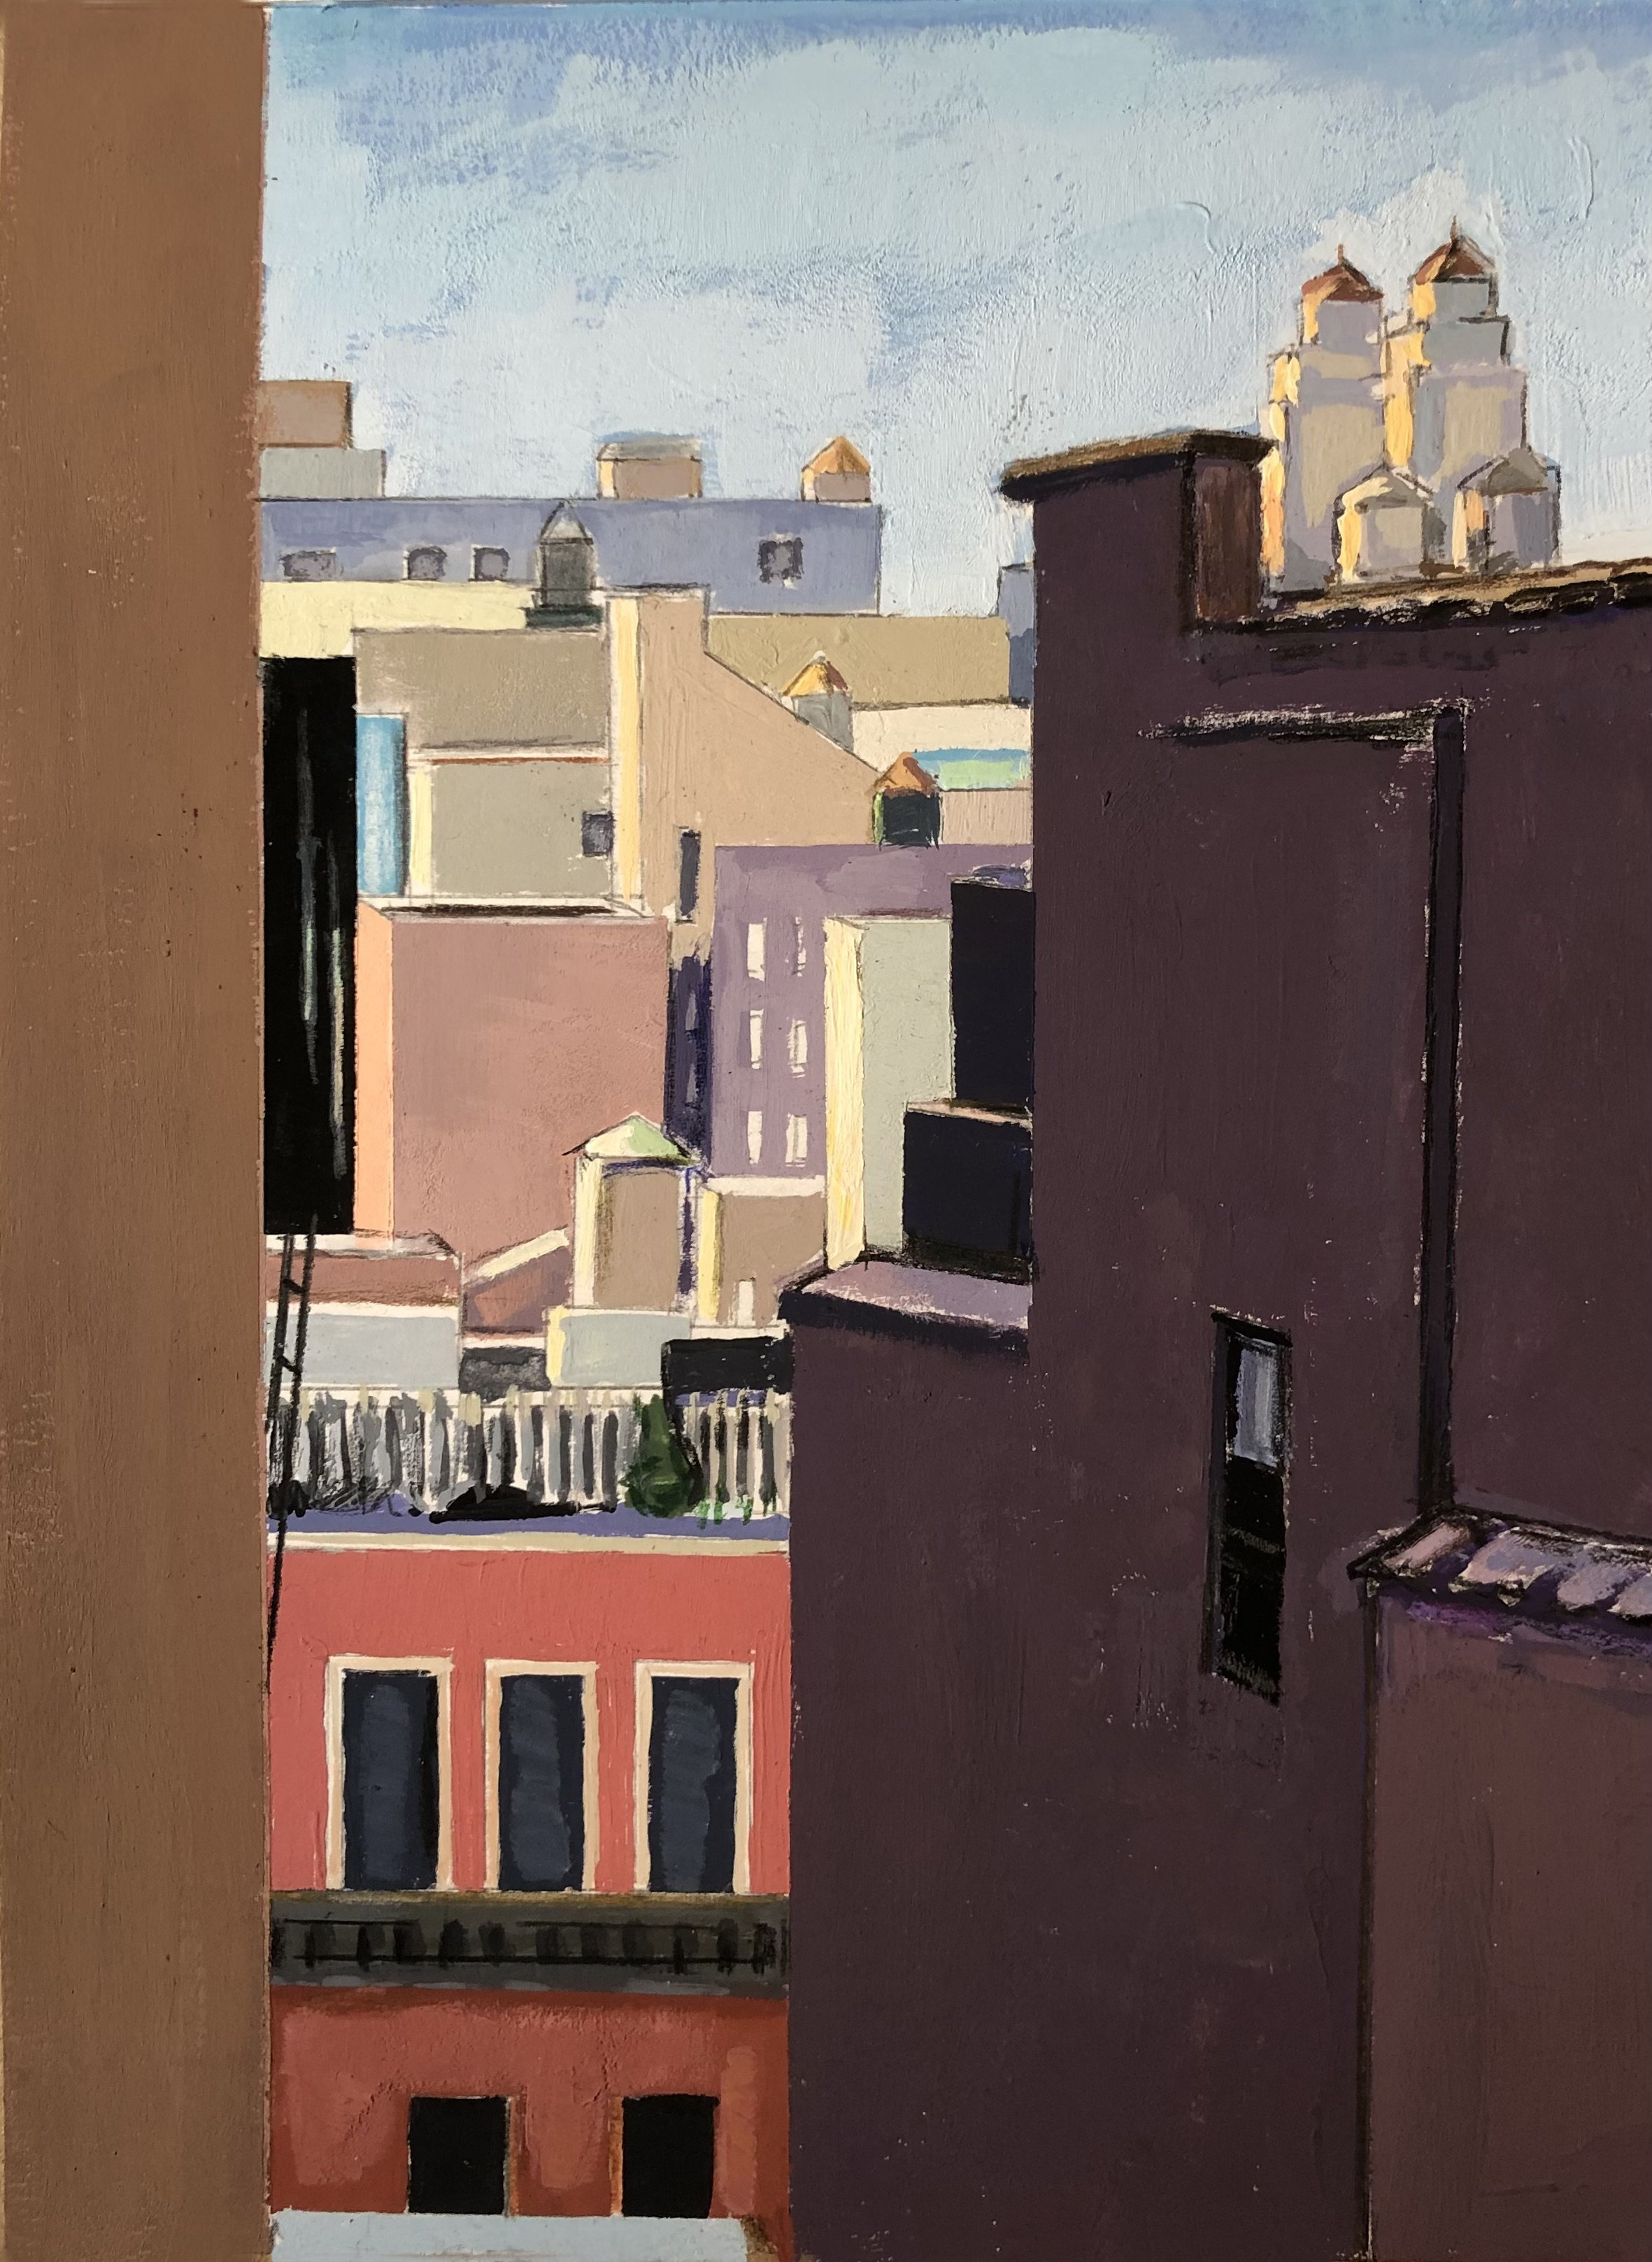    Rooftops Through the Alley (UWS),   gouache, 8 x 6 in, 2022   